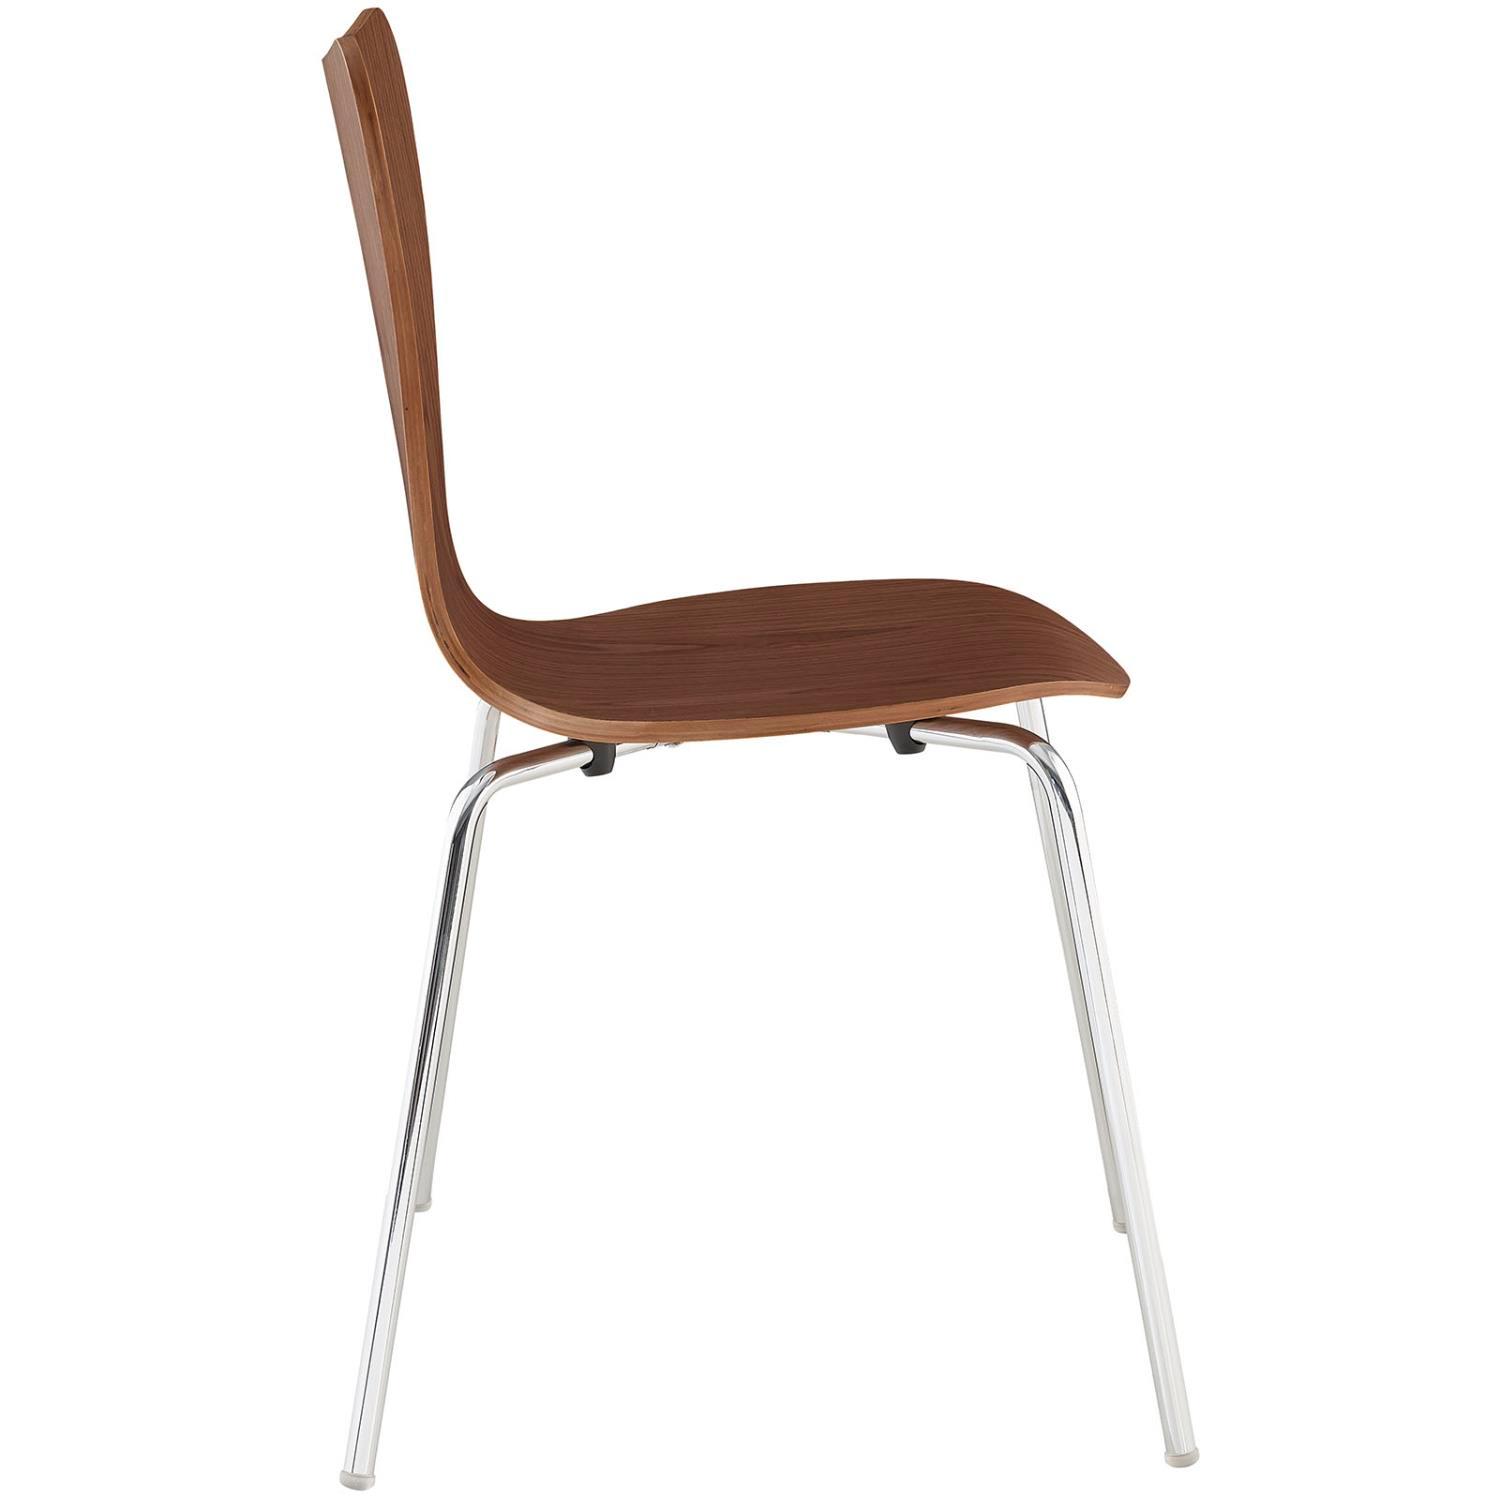 Modway Ernie Dining Side Chair With Walnut Finish EEI-537-WAL